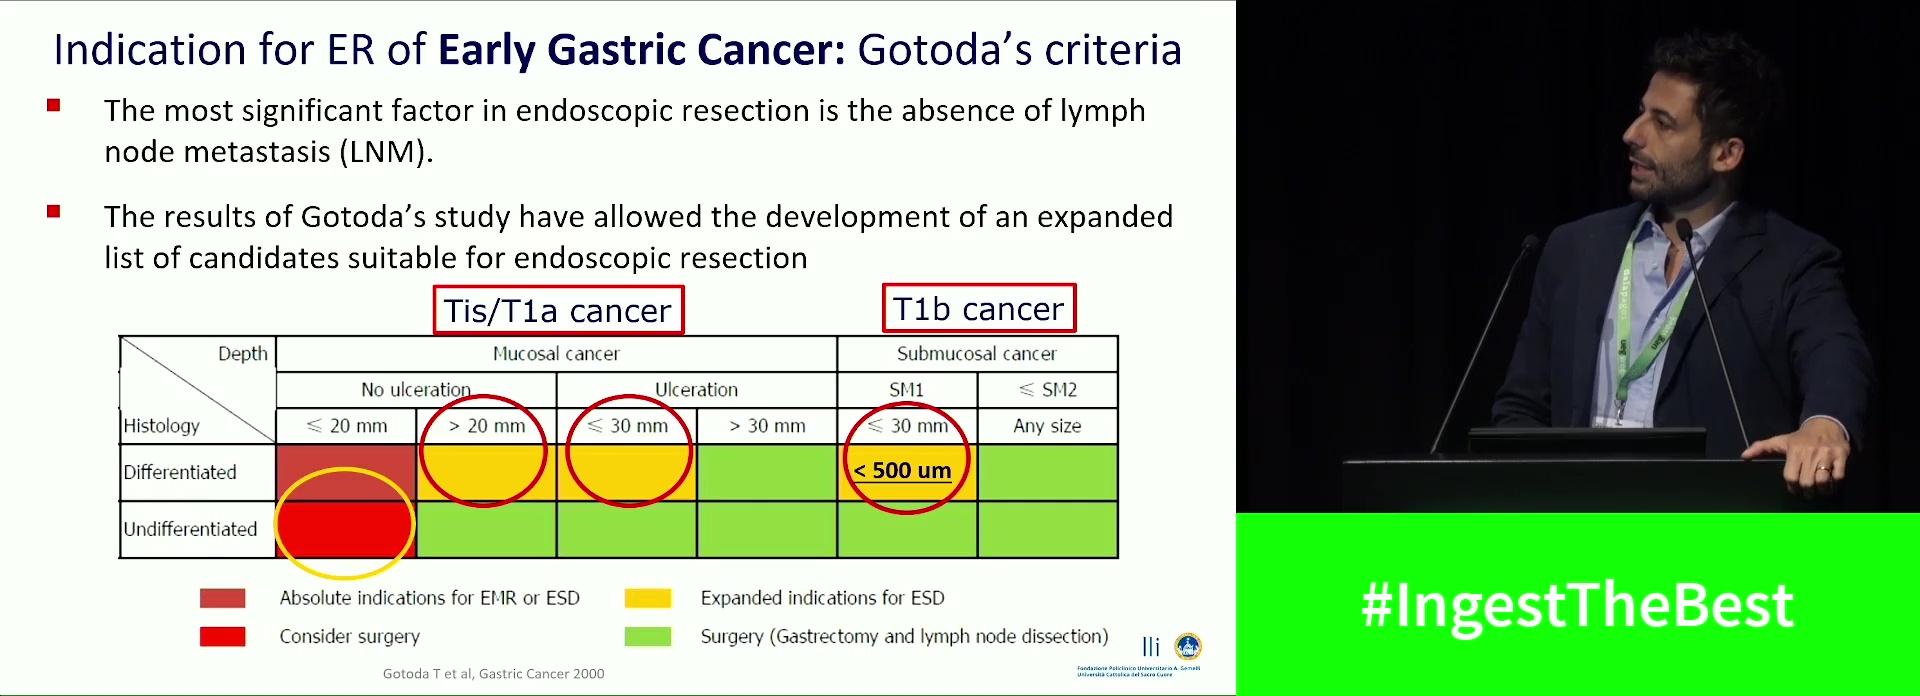 T1b cancer: Only endoscopic treatment?